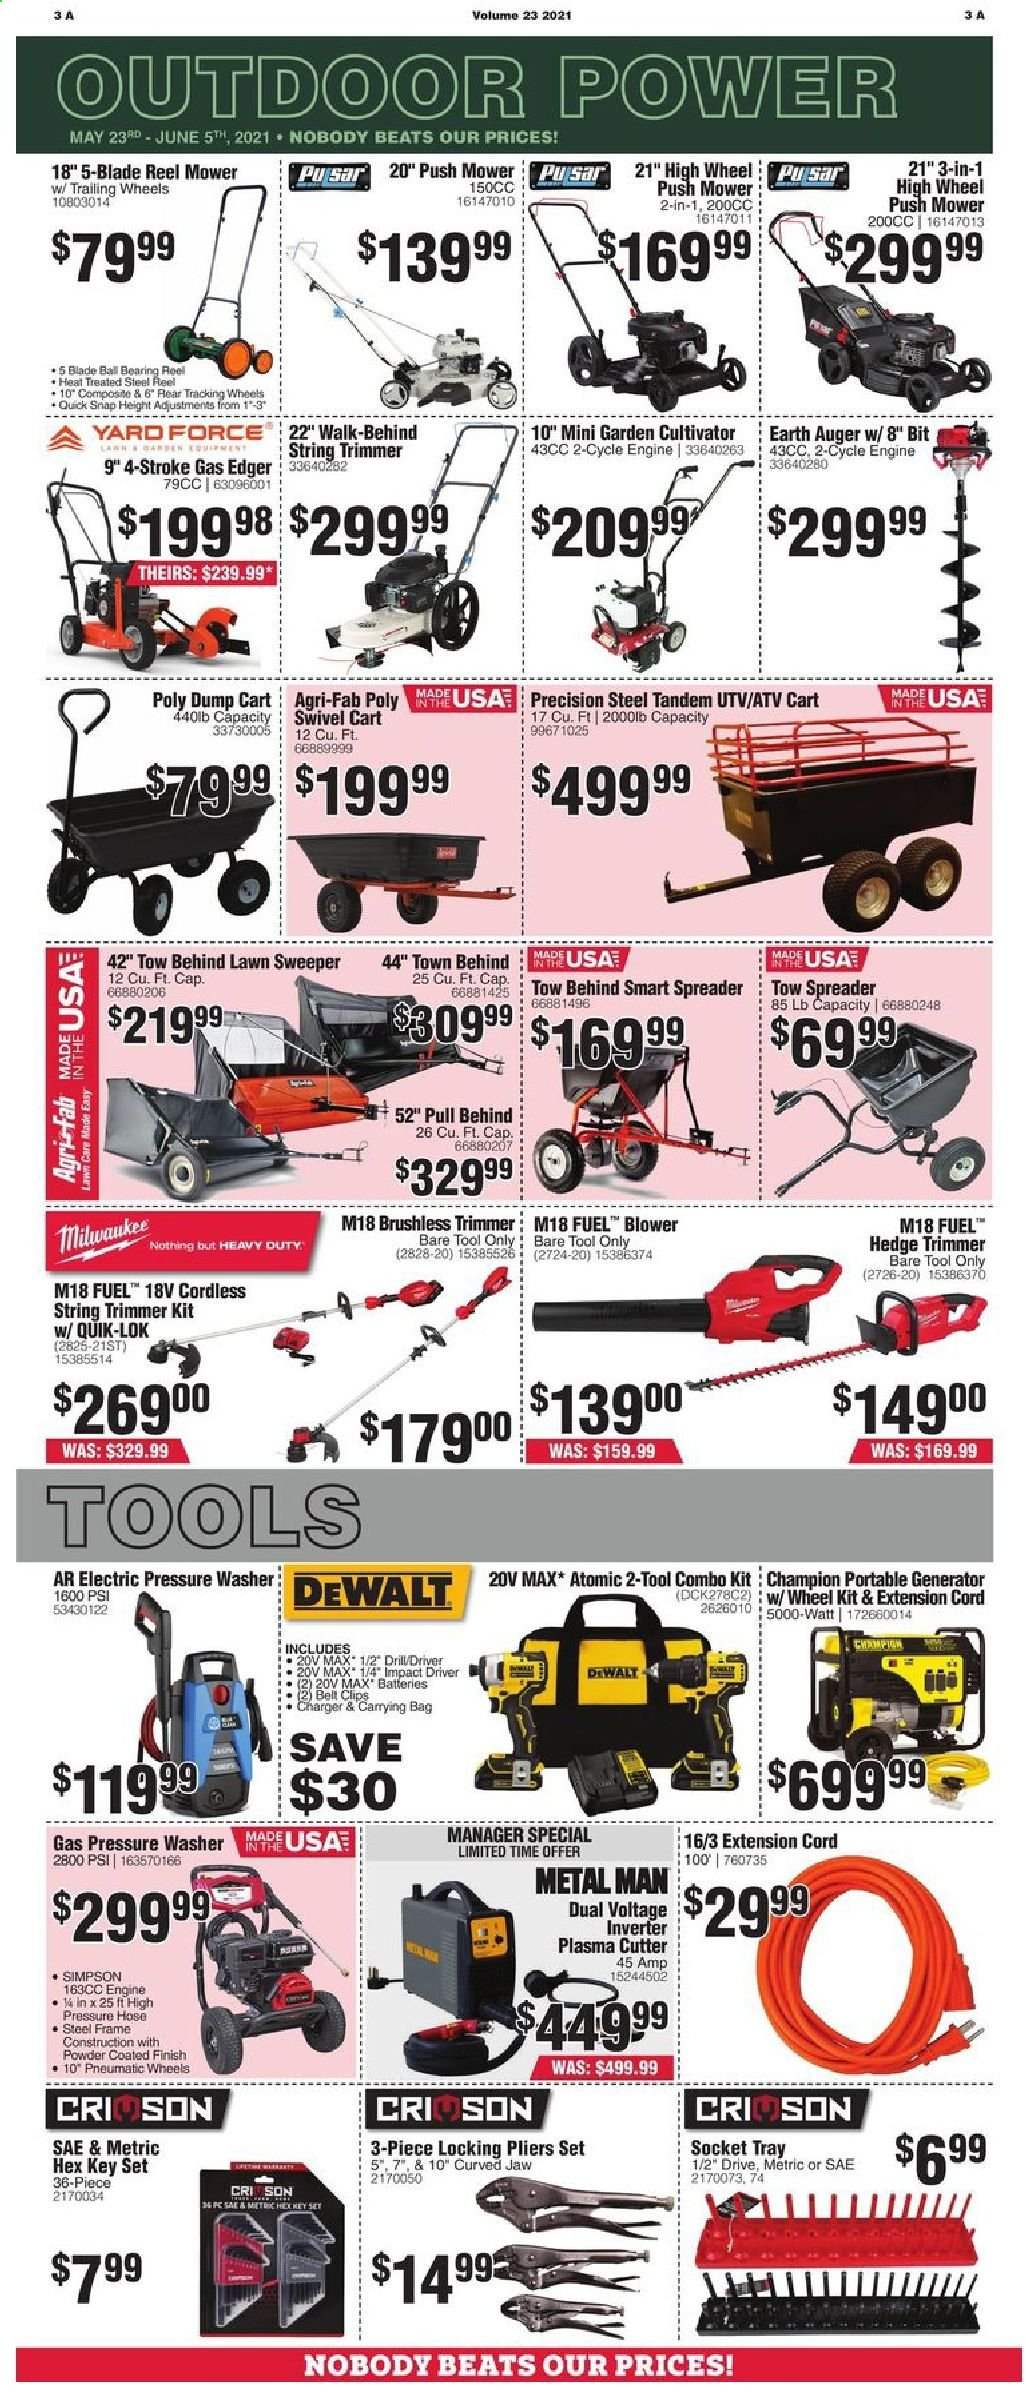 thumbnail - Rural King Flyer - 05/23/2021 - 06/05/2021 - Sales products - Fab, tray, AEG, cap, bag, belt, reel, socket, DeWALT, impact driver, plasma cutter, string trimmer, trimmer, spreader, hedge trimmer, pliers, combo kit, blower, electric pressure washer, extension cord, pressure washer, generator, cart. Page 6.